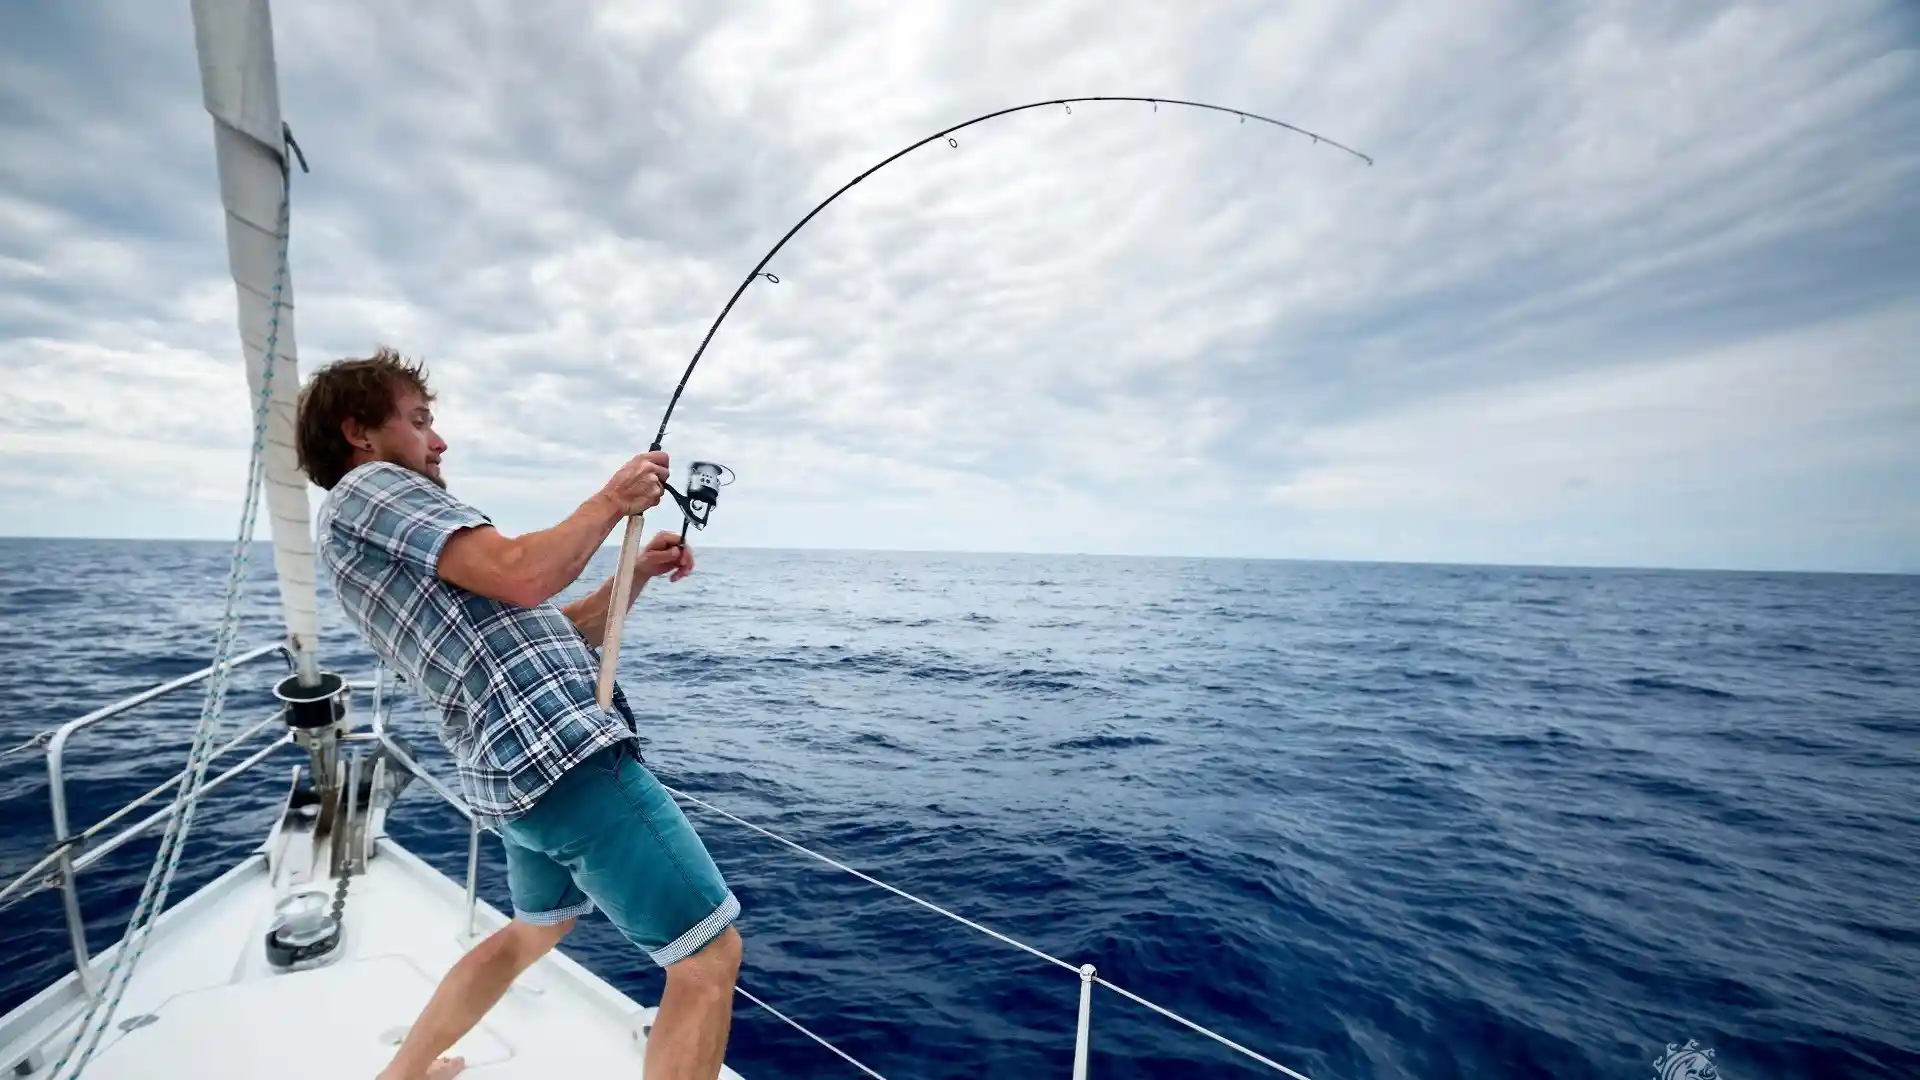 Using San Diego Fishing Charters can be highly advantageous